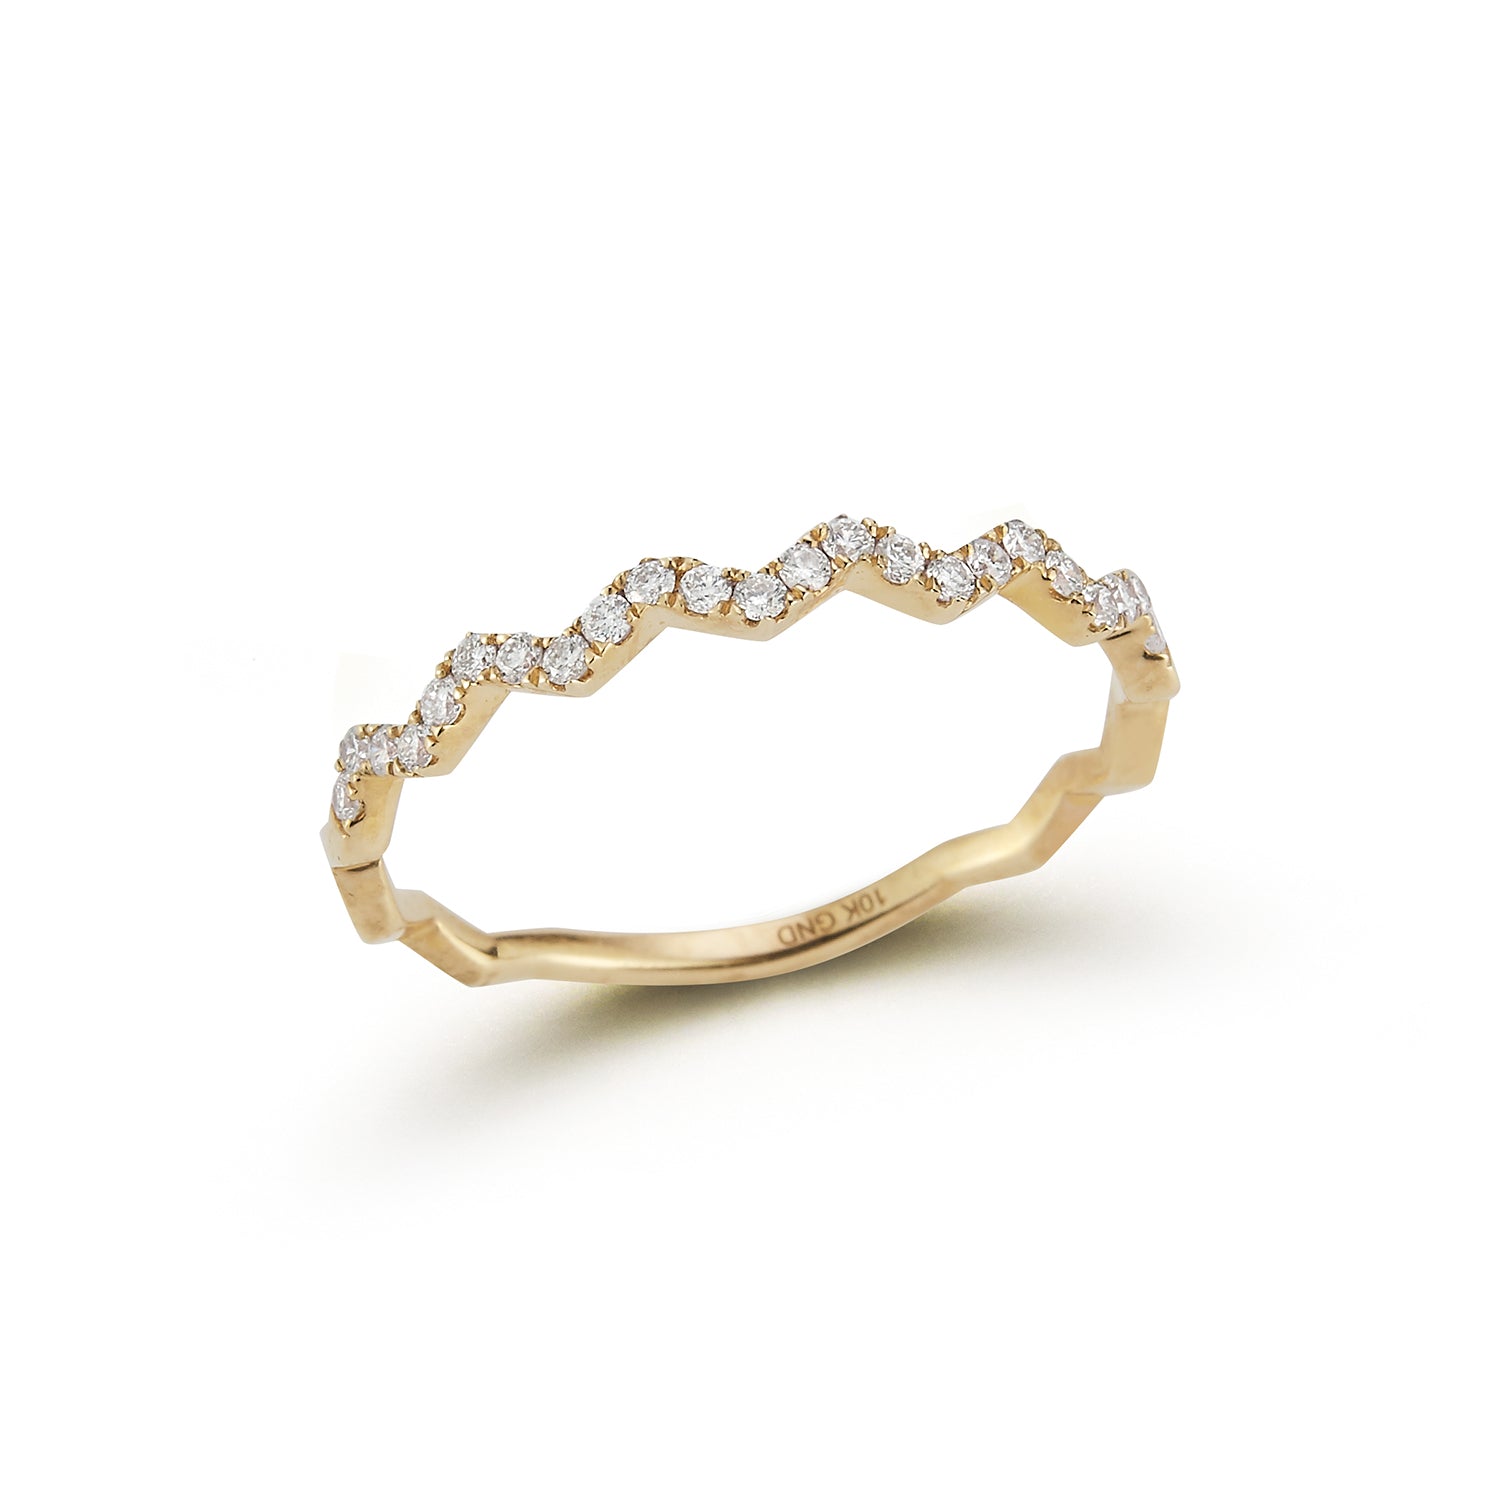 The Whitney Stacking Ring